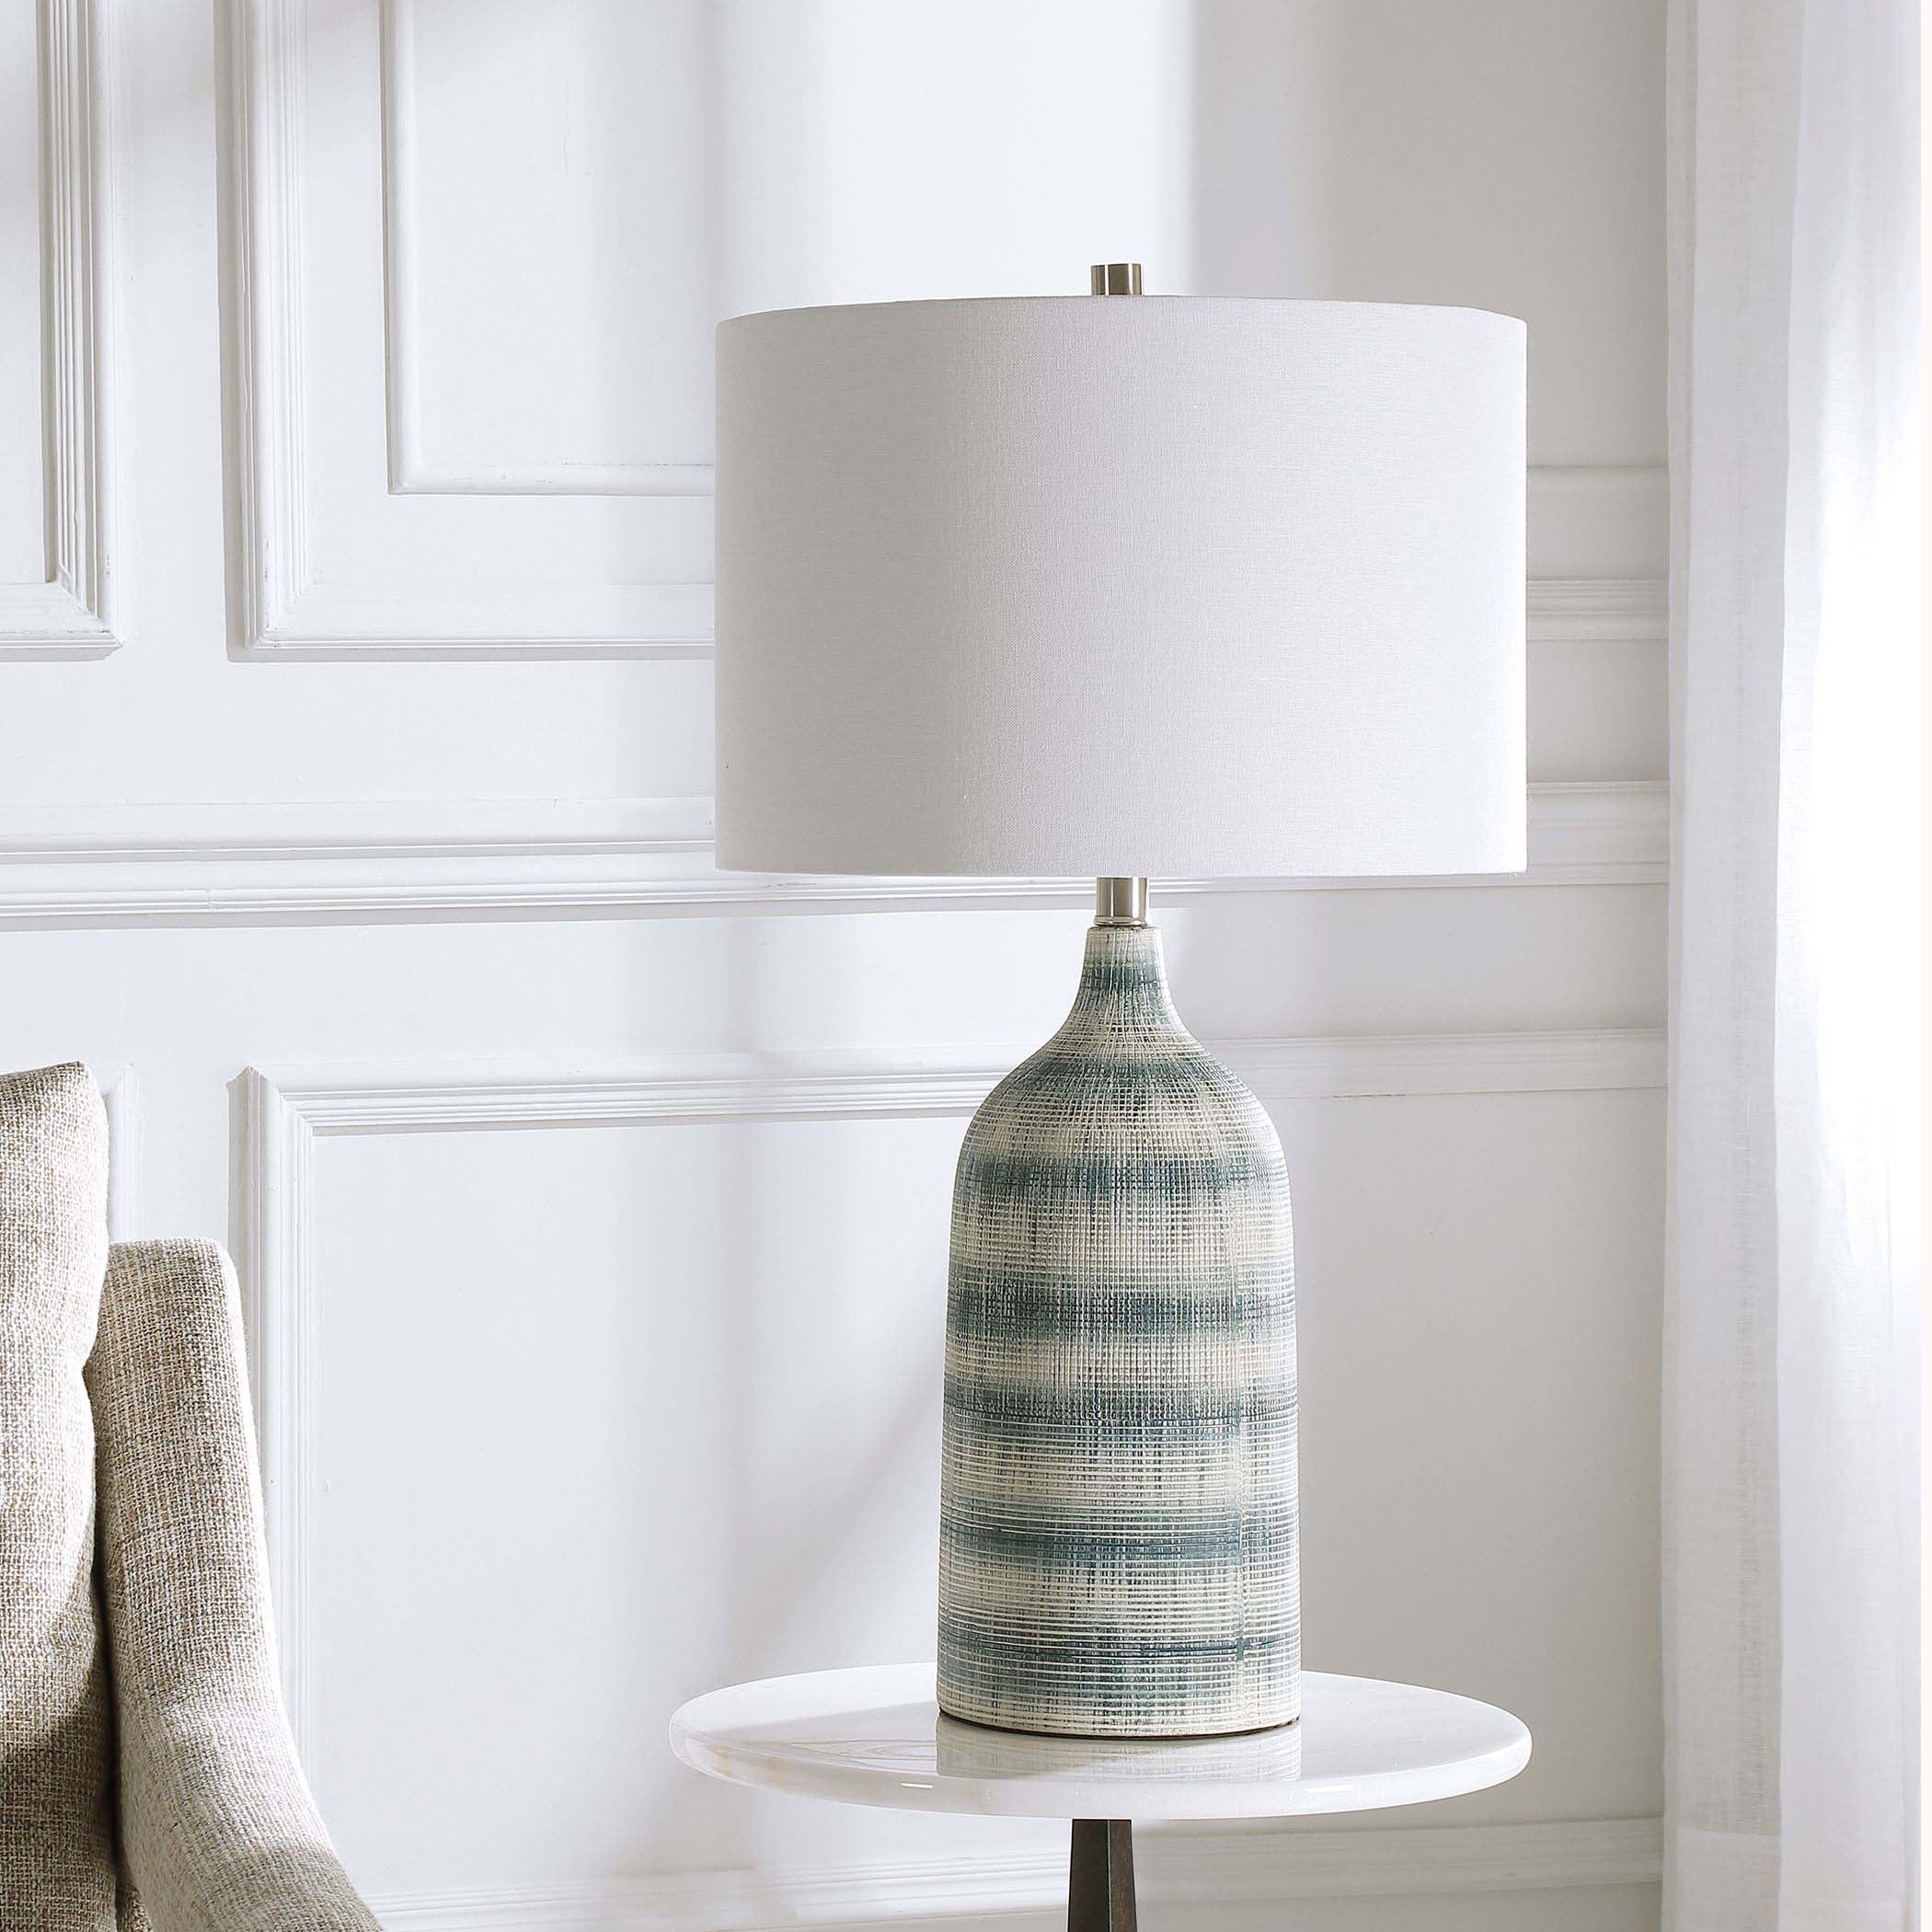 Decor Market Textured Ceramic Table Lamp With A Mixture Of Blue And White Asymmetrical Stripes